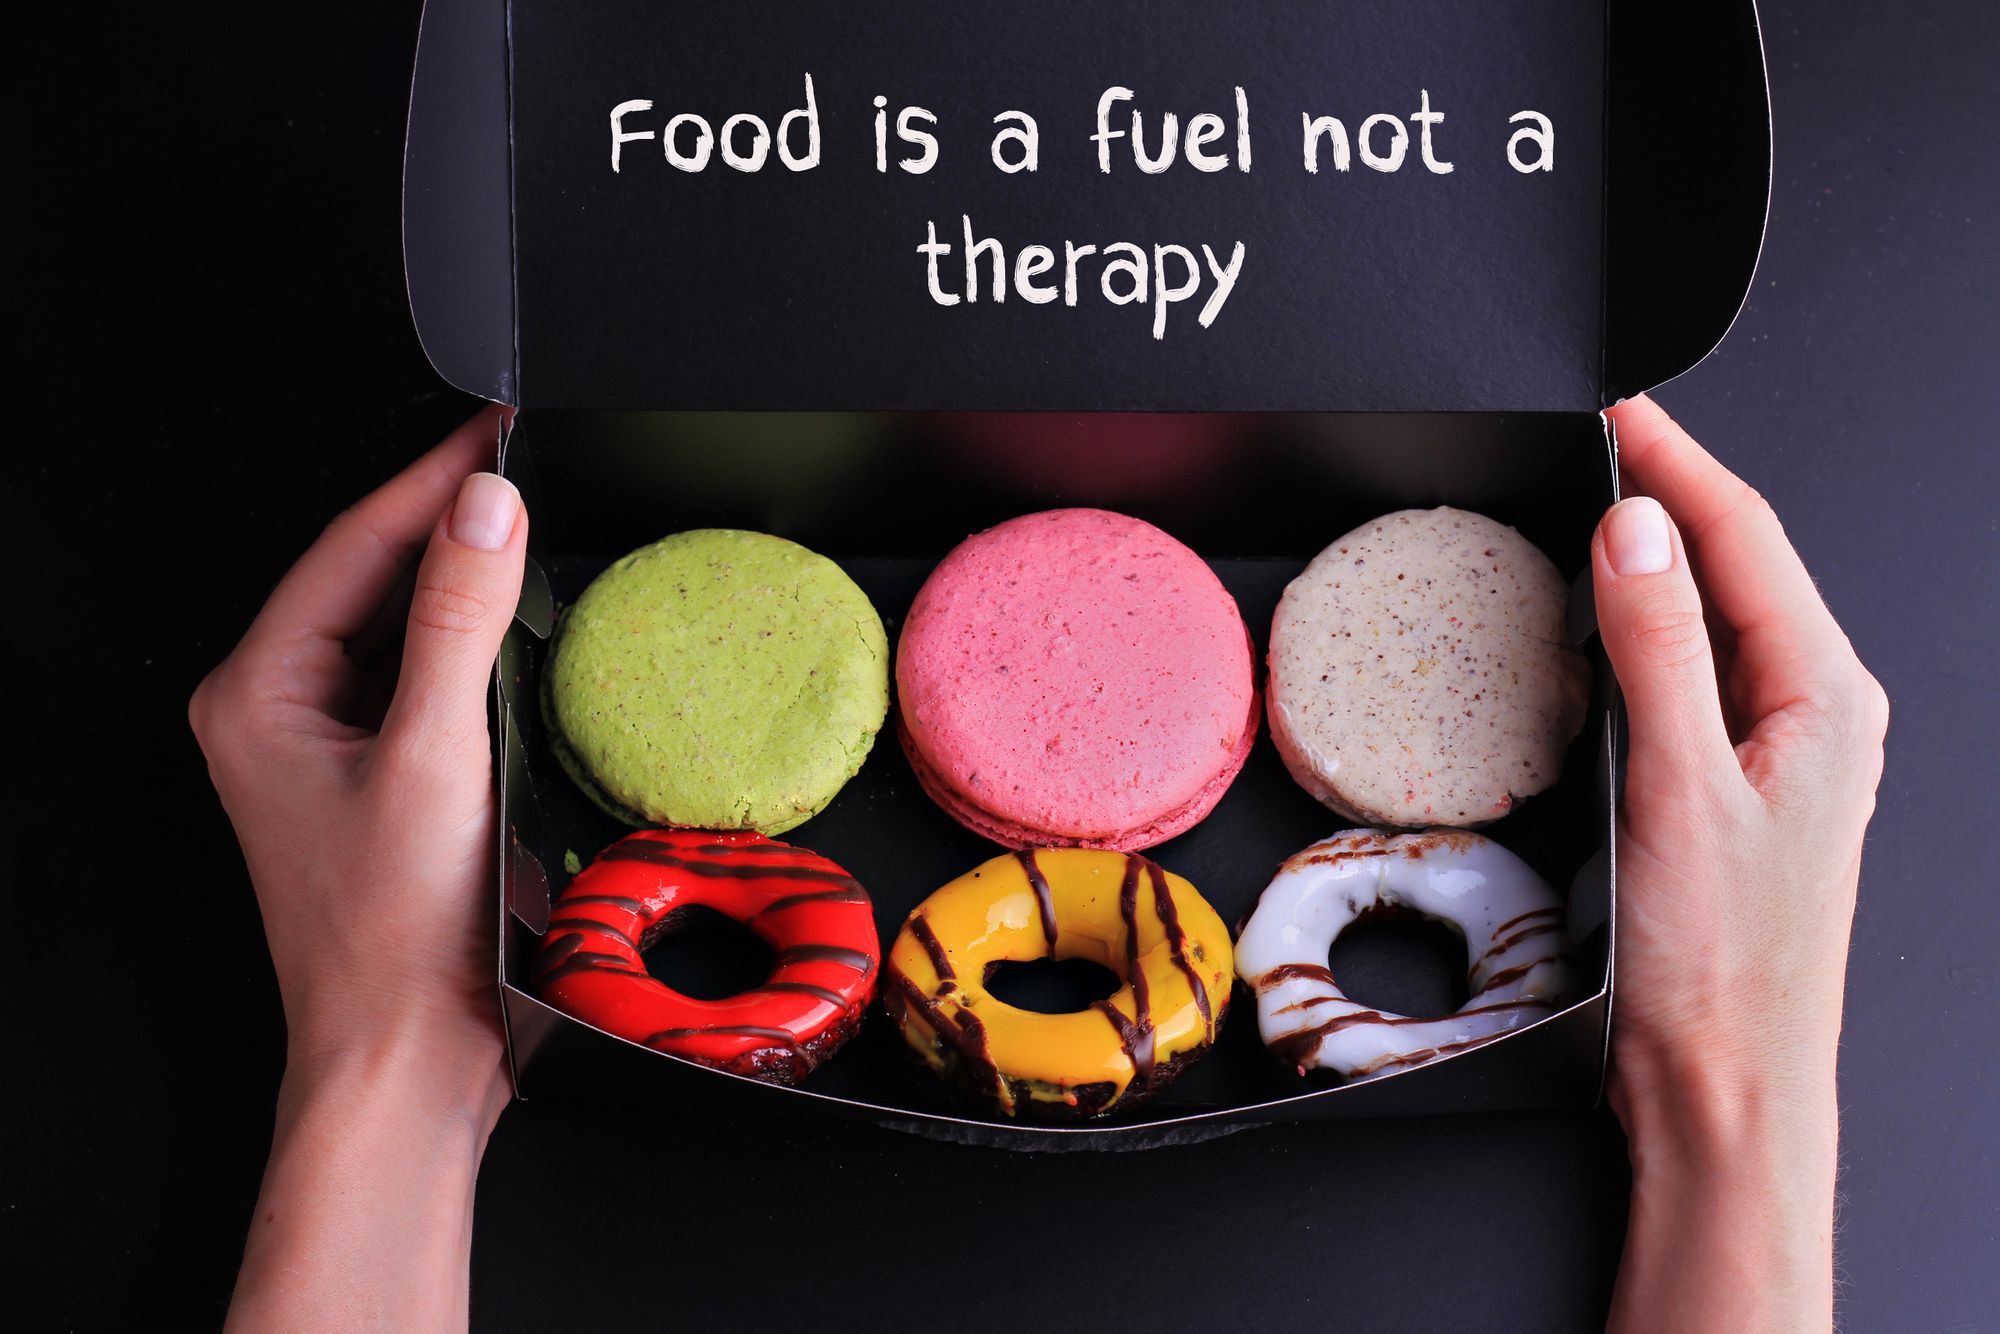 Food Is A Fuel Not Therapy By Albina Gavrilovic | www.shutterstock.com